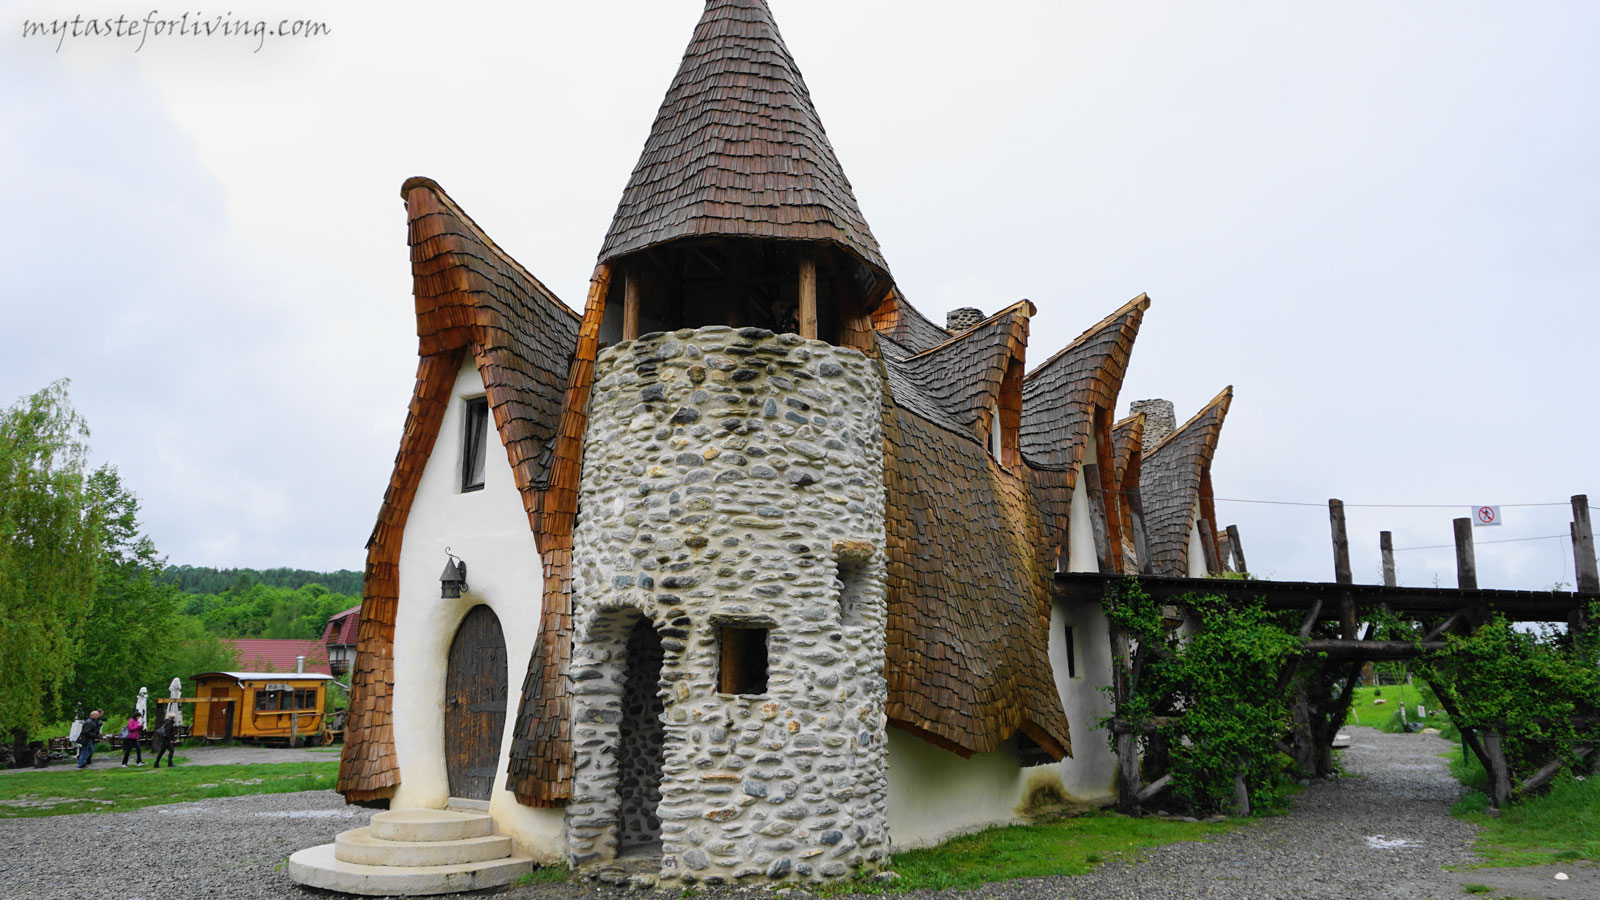 Clay Castle in the valley of the Fairies - Castelul de Lut Valea Zanelor is located near the city of Sibiu, Romania and its most interesting feature is that it is built with organic materials-clay, straw, sand and wood.